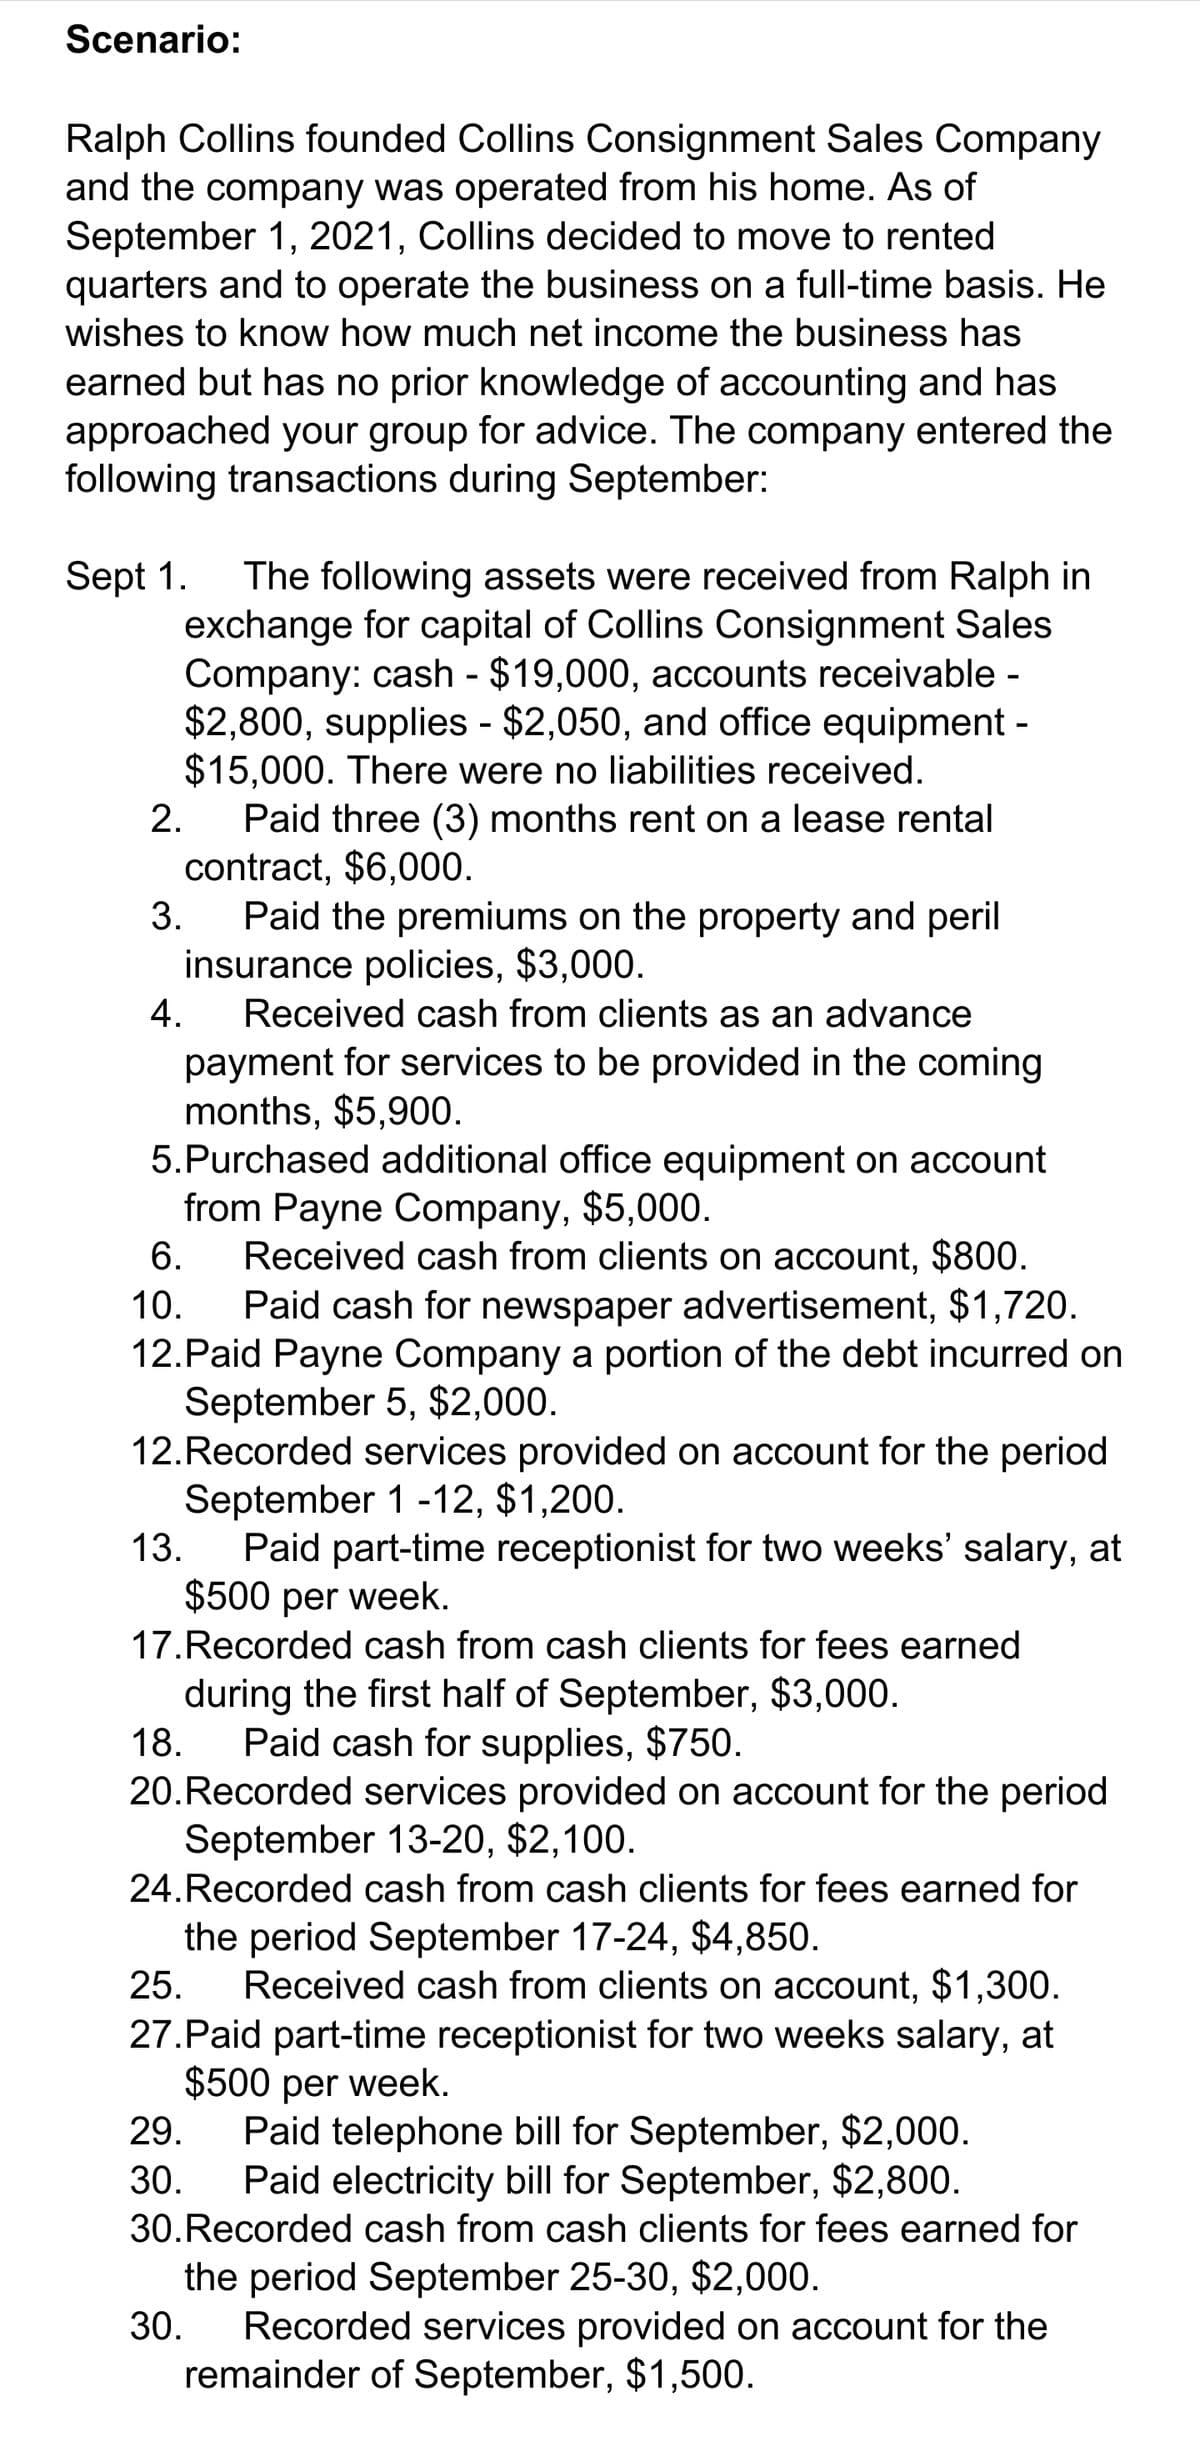 Scenario:
Ralph Collins founded Collins Consignment Sales Company
and the company was operated from his home. As of
September 1, 2021, Collins decided to move to rented
quarters and to operate the business on a full-time basis. He
wishes to know how much net income the business has
earned but has no prior knowledge of accounting and has
approached your group for advice. The company entered the
following transactions during September:
Sept 1. The following assets were received from Ralph in
exchange for capital of Collins Consignment Sales
Company: cash - $19,000, accounts receivable -
$2,800, supplies - $2,050, and office equipment -
$15,000. There were no liabilities received.
Paid three (3) months rent on a lease rental
contract, $6,000.
2.
3. Paid the premiums on the property and peril
insurance policies, $3,000.
Received cash from clients as an advance
4.
payment for services to be provided in the coming
months, $5,900.
5.Purchased additional office equipment on account
from Payne Company, $5,000.
Received cash from clients on account, $800.
Paid cash for newspaper advertisement, $1,720.
12.Paid Payne Company a portion of the debt incurred on
September 5, $2,000.
6.
10.
12. Recorded services provided on account for the period
September 1-12, $1,200.
13. Paid part-time receptionist for two weeks' salary, at
$500 per week.
17. Recorded cash from cash clients for fees earned
during the first half of September, $3,000.
18. Paid cash for supplies, $750.
20. Recorded services provided on account for the period
September 13-20, $2,100.
24. Recorded cash from cash clients for fees earned for
the period September 17-24, $4,850.
25.
Received cash from clients on account, $1,300.
27.Paid part-time receptionist for two weeks salary, at
$500 per week.
29. Paid telephone bill for September, $2,000.
30. Paid electricity bill for September, $2,800.
30. Recorded cash from cash clients for fees earned for
the period September 25-30, $2,000.
30.
Recorded services provided on account for the
remainder of September, $1,500.